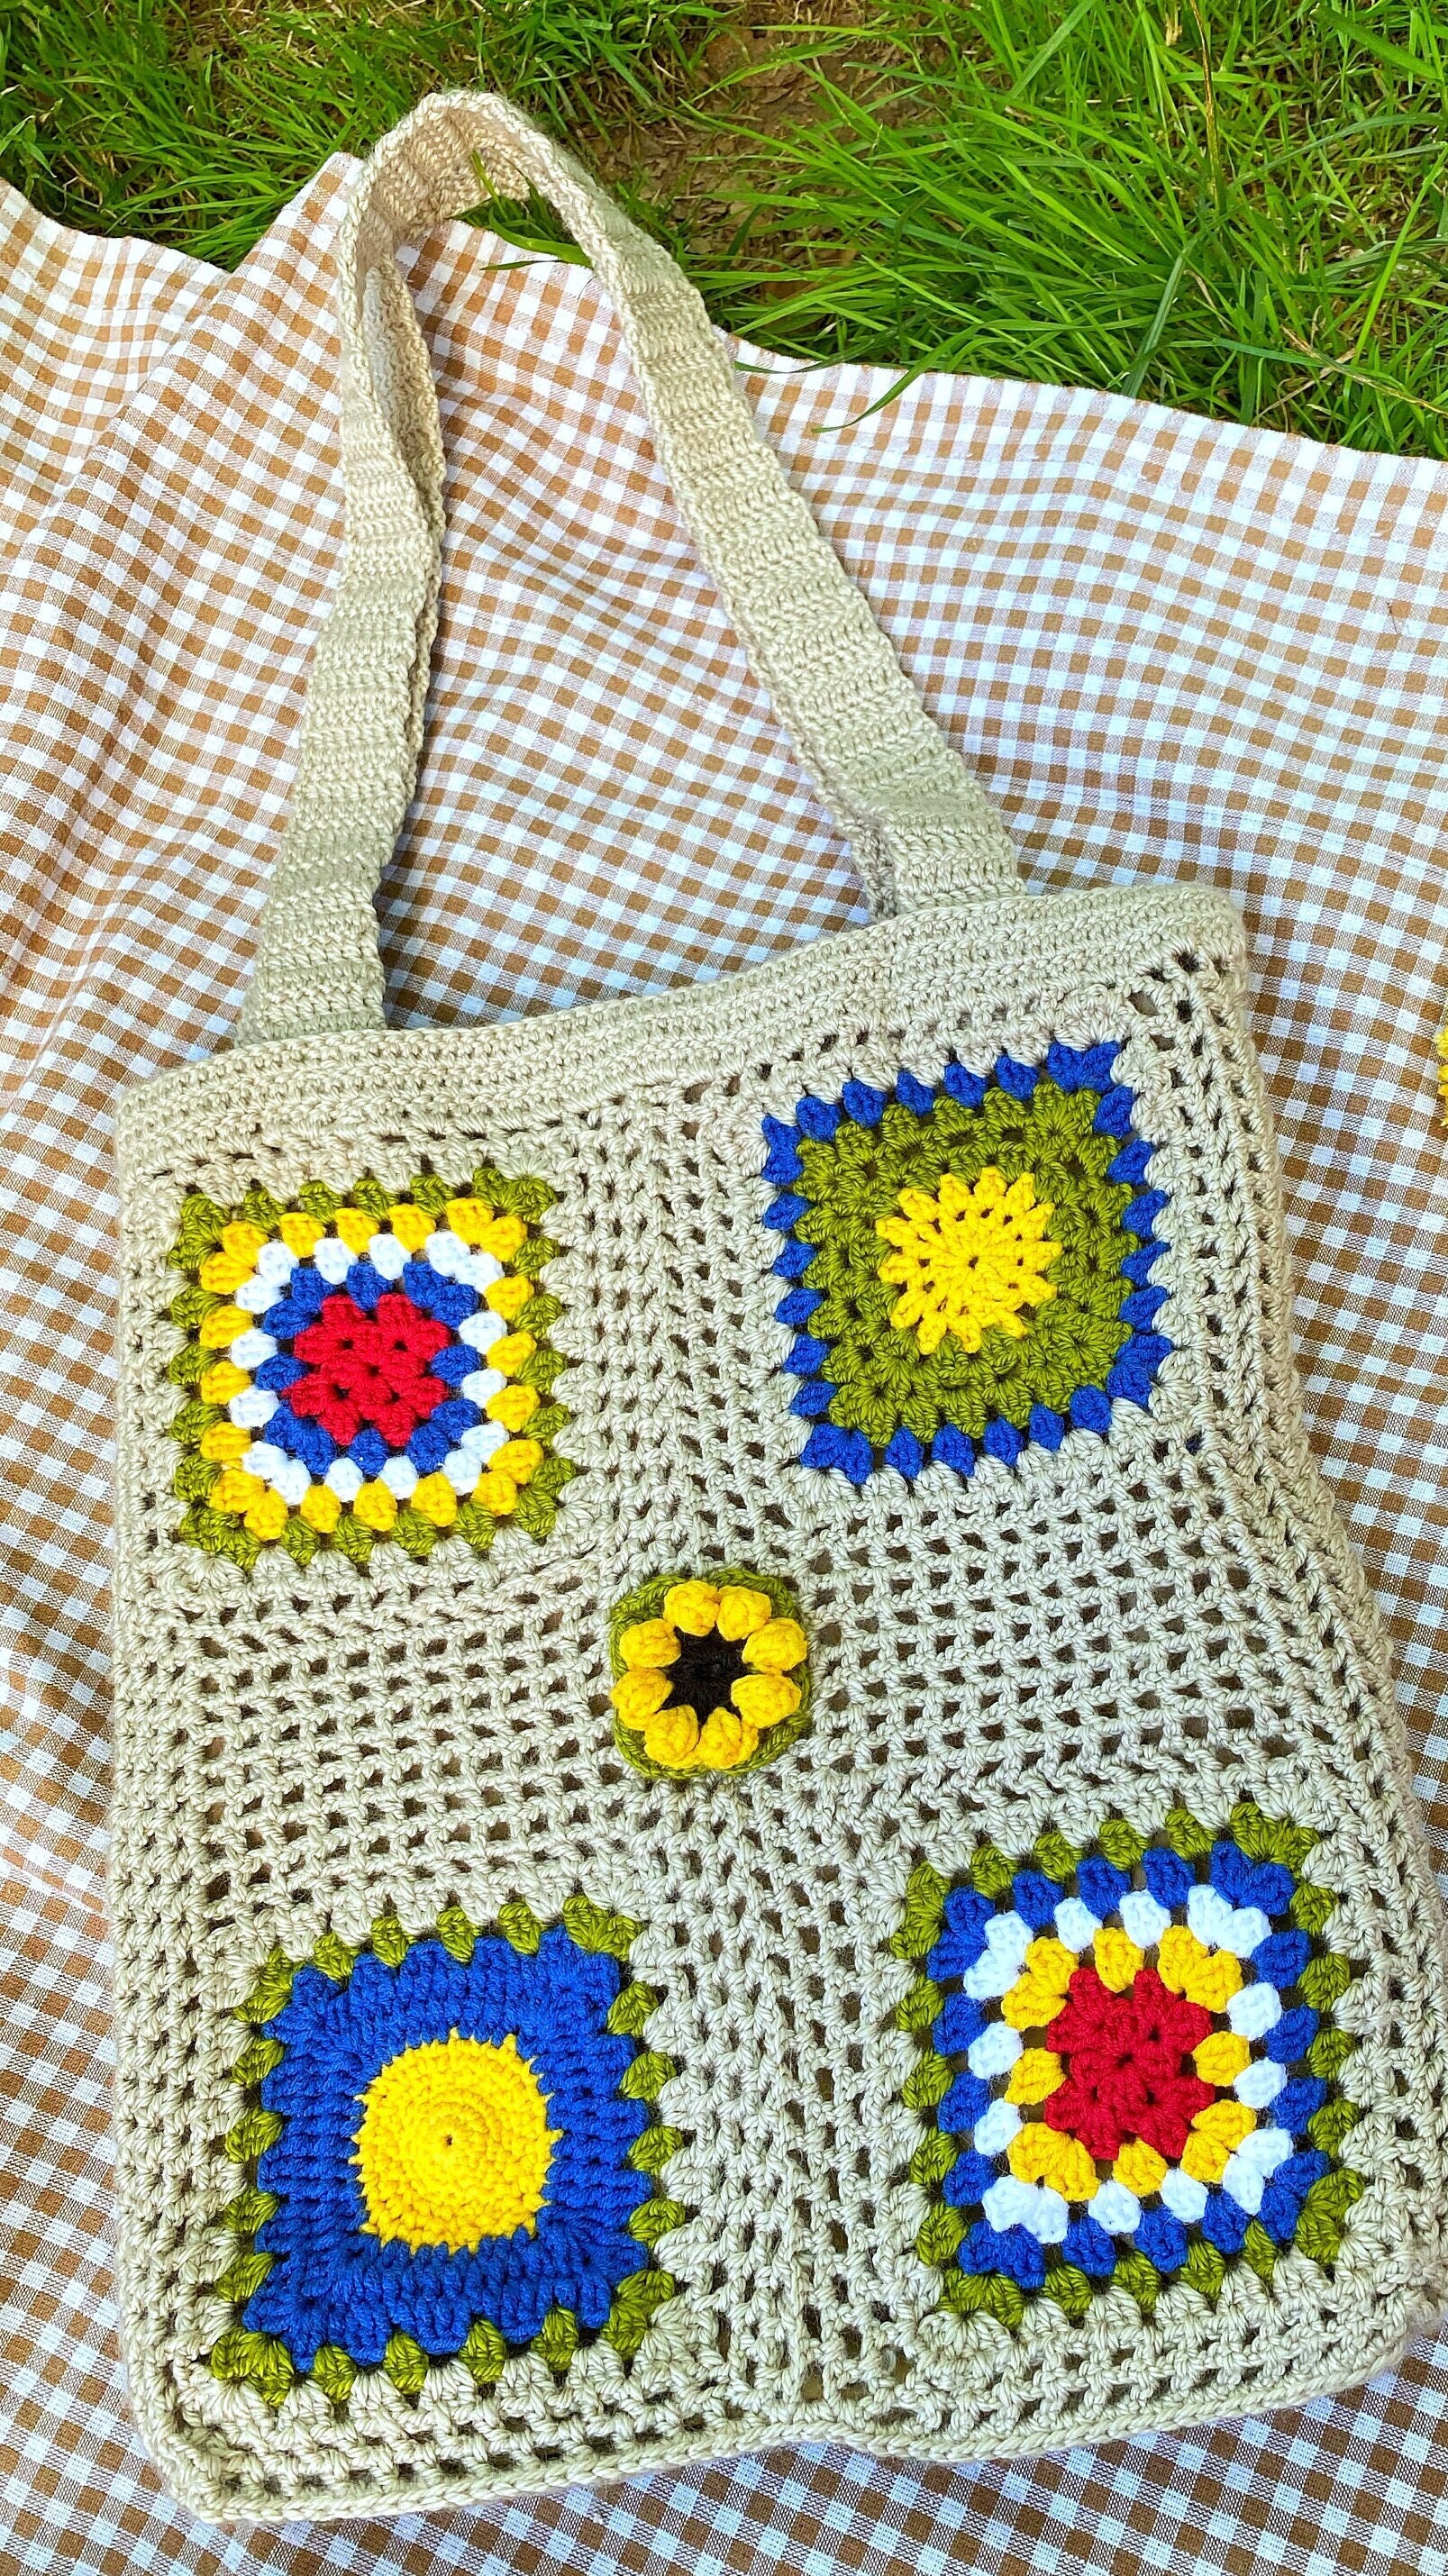 Handmade Granny Square Crochet Bag, Hand Knit Purse, Knitted